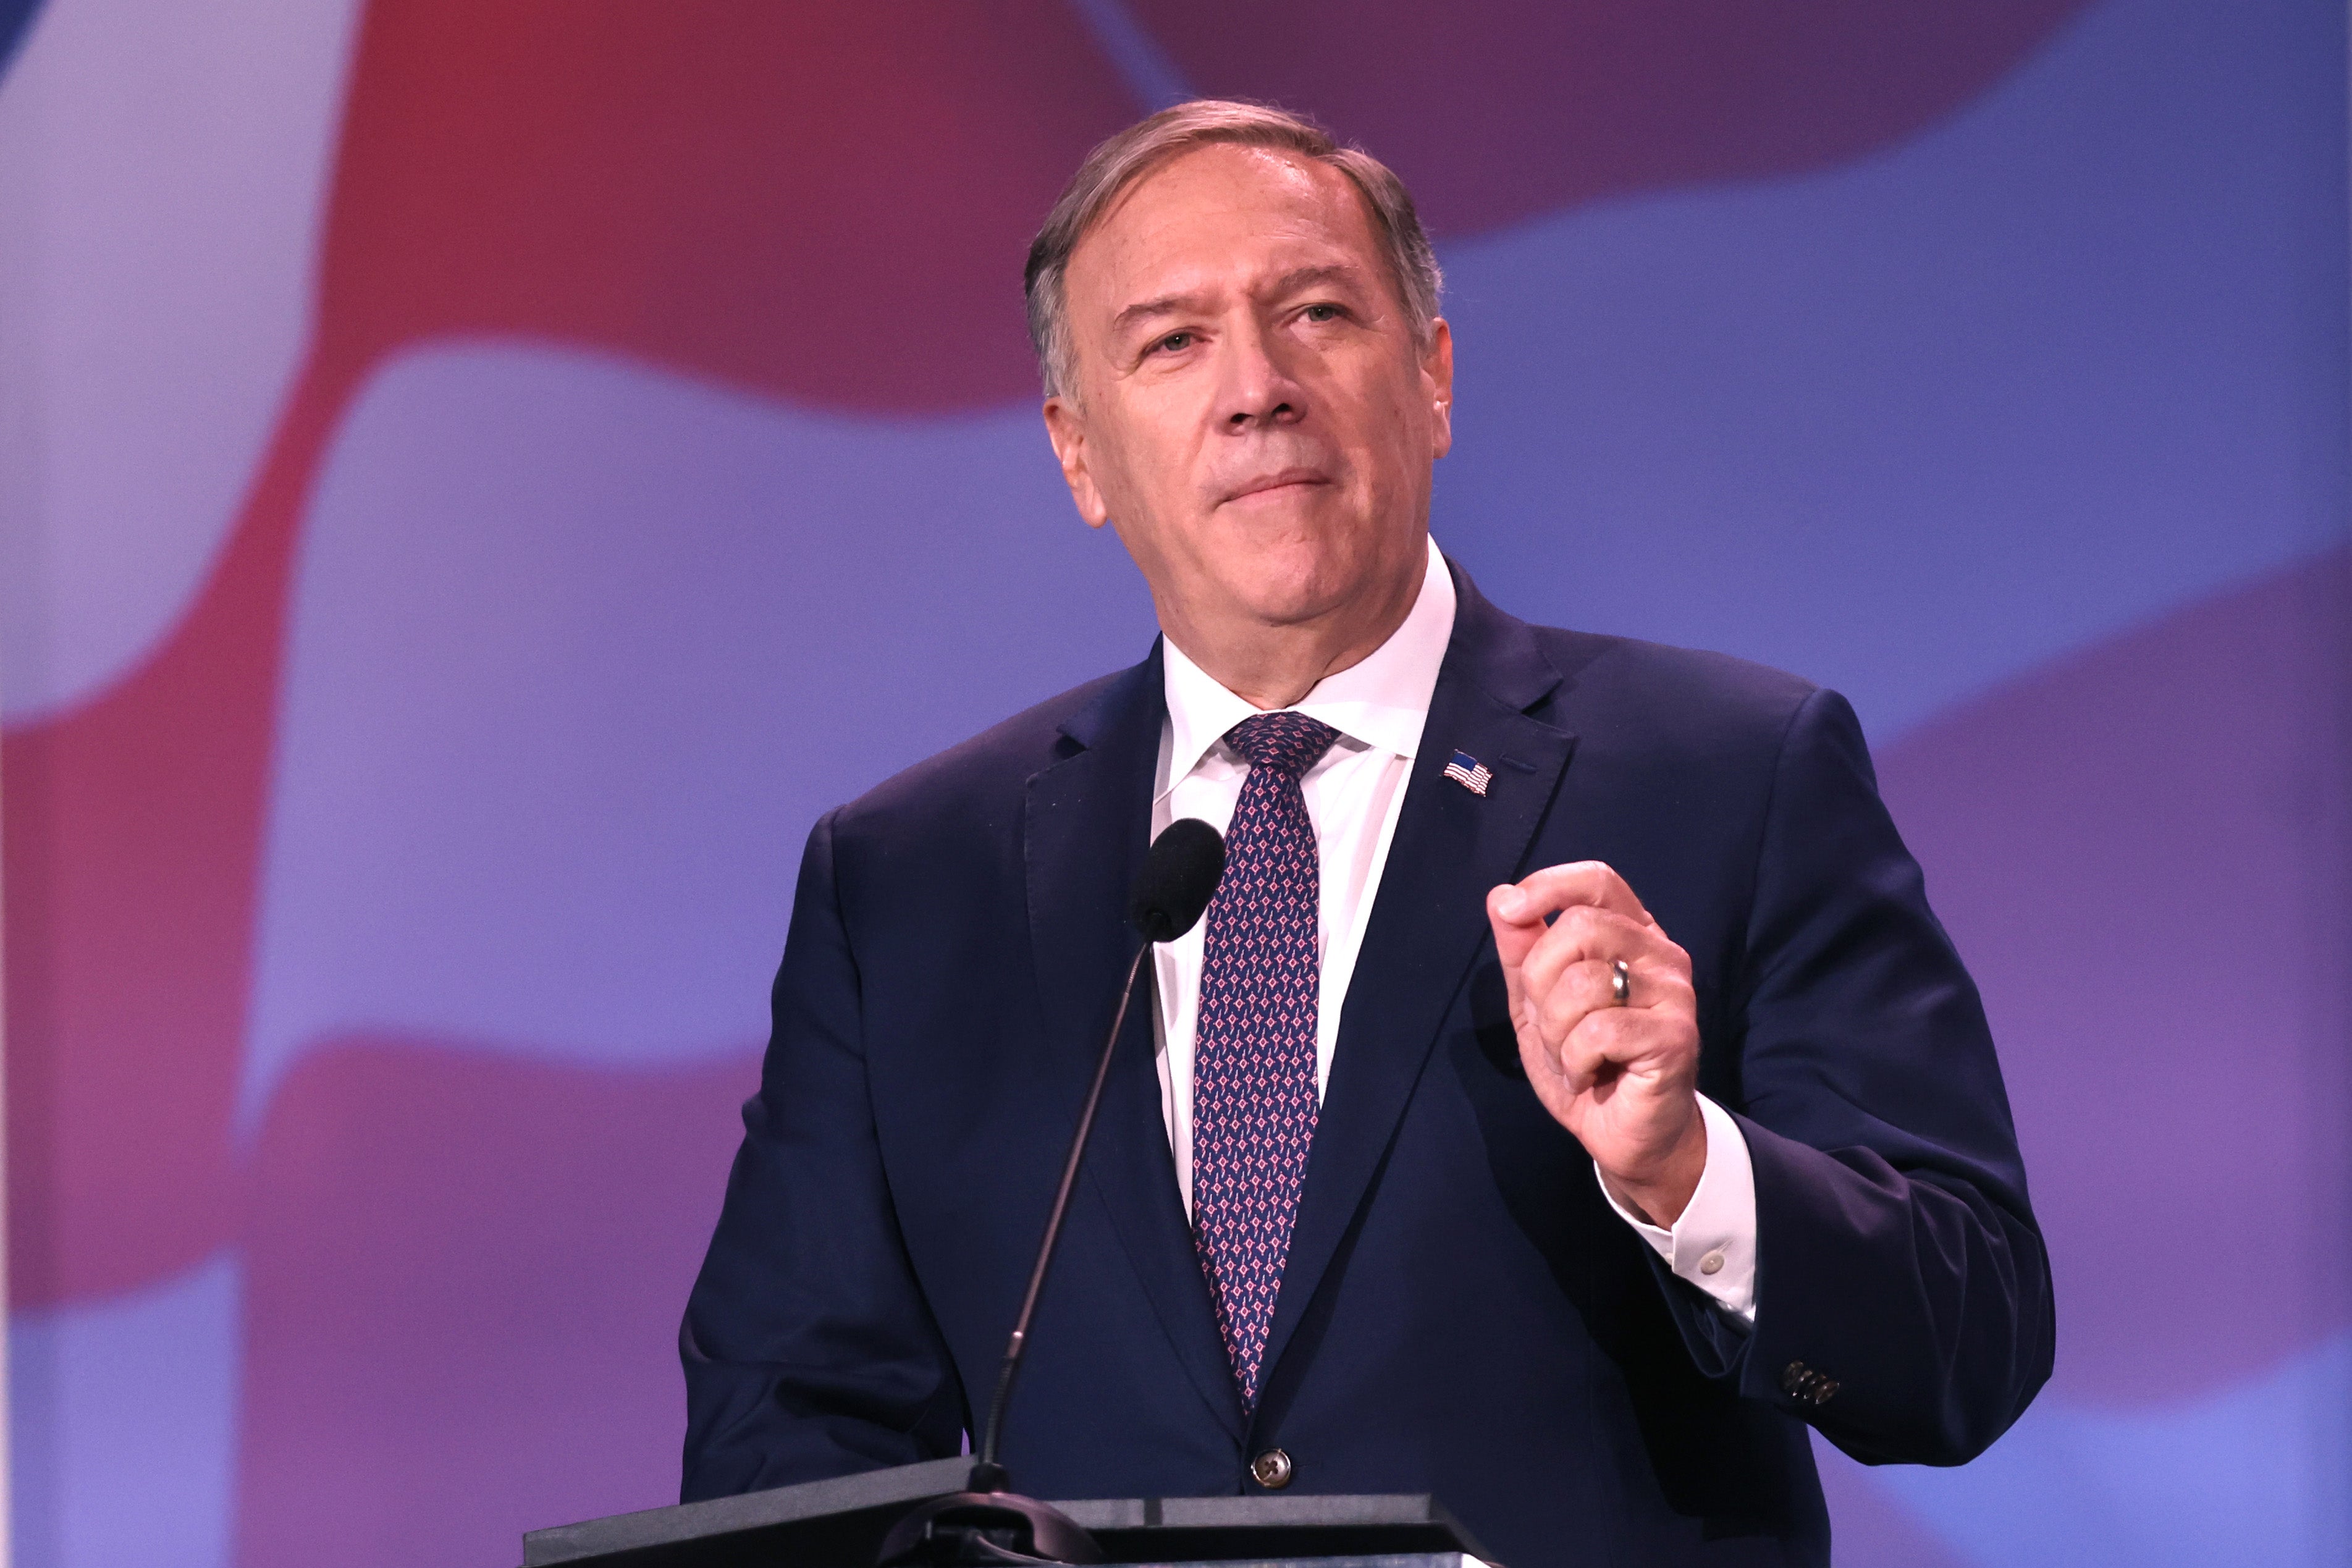 Mr Pompeo has been talked of as potential GOP hopeful for 2024 presidential season